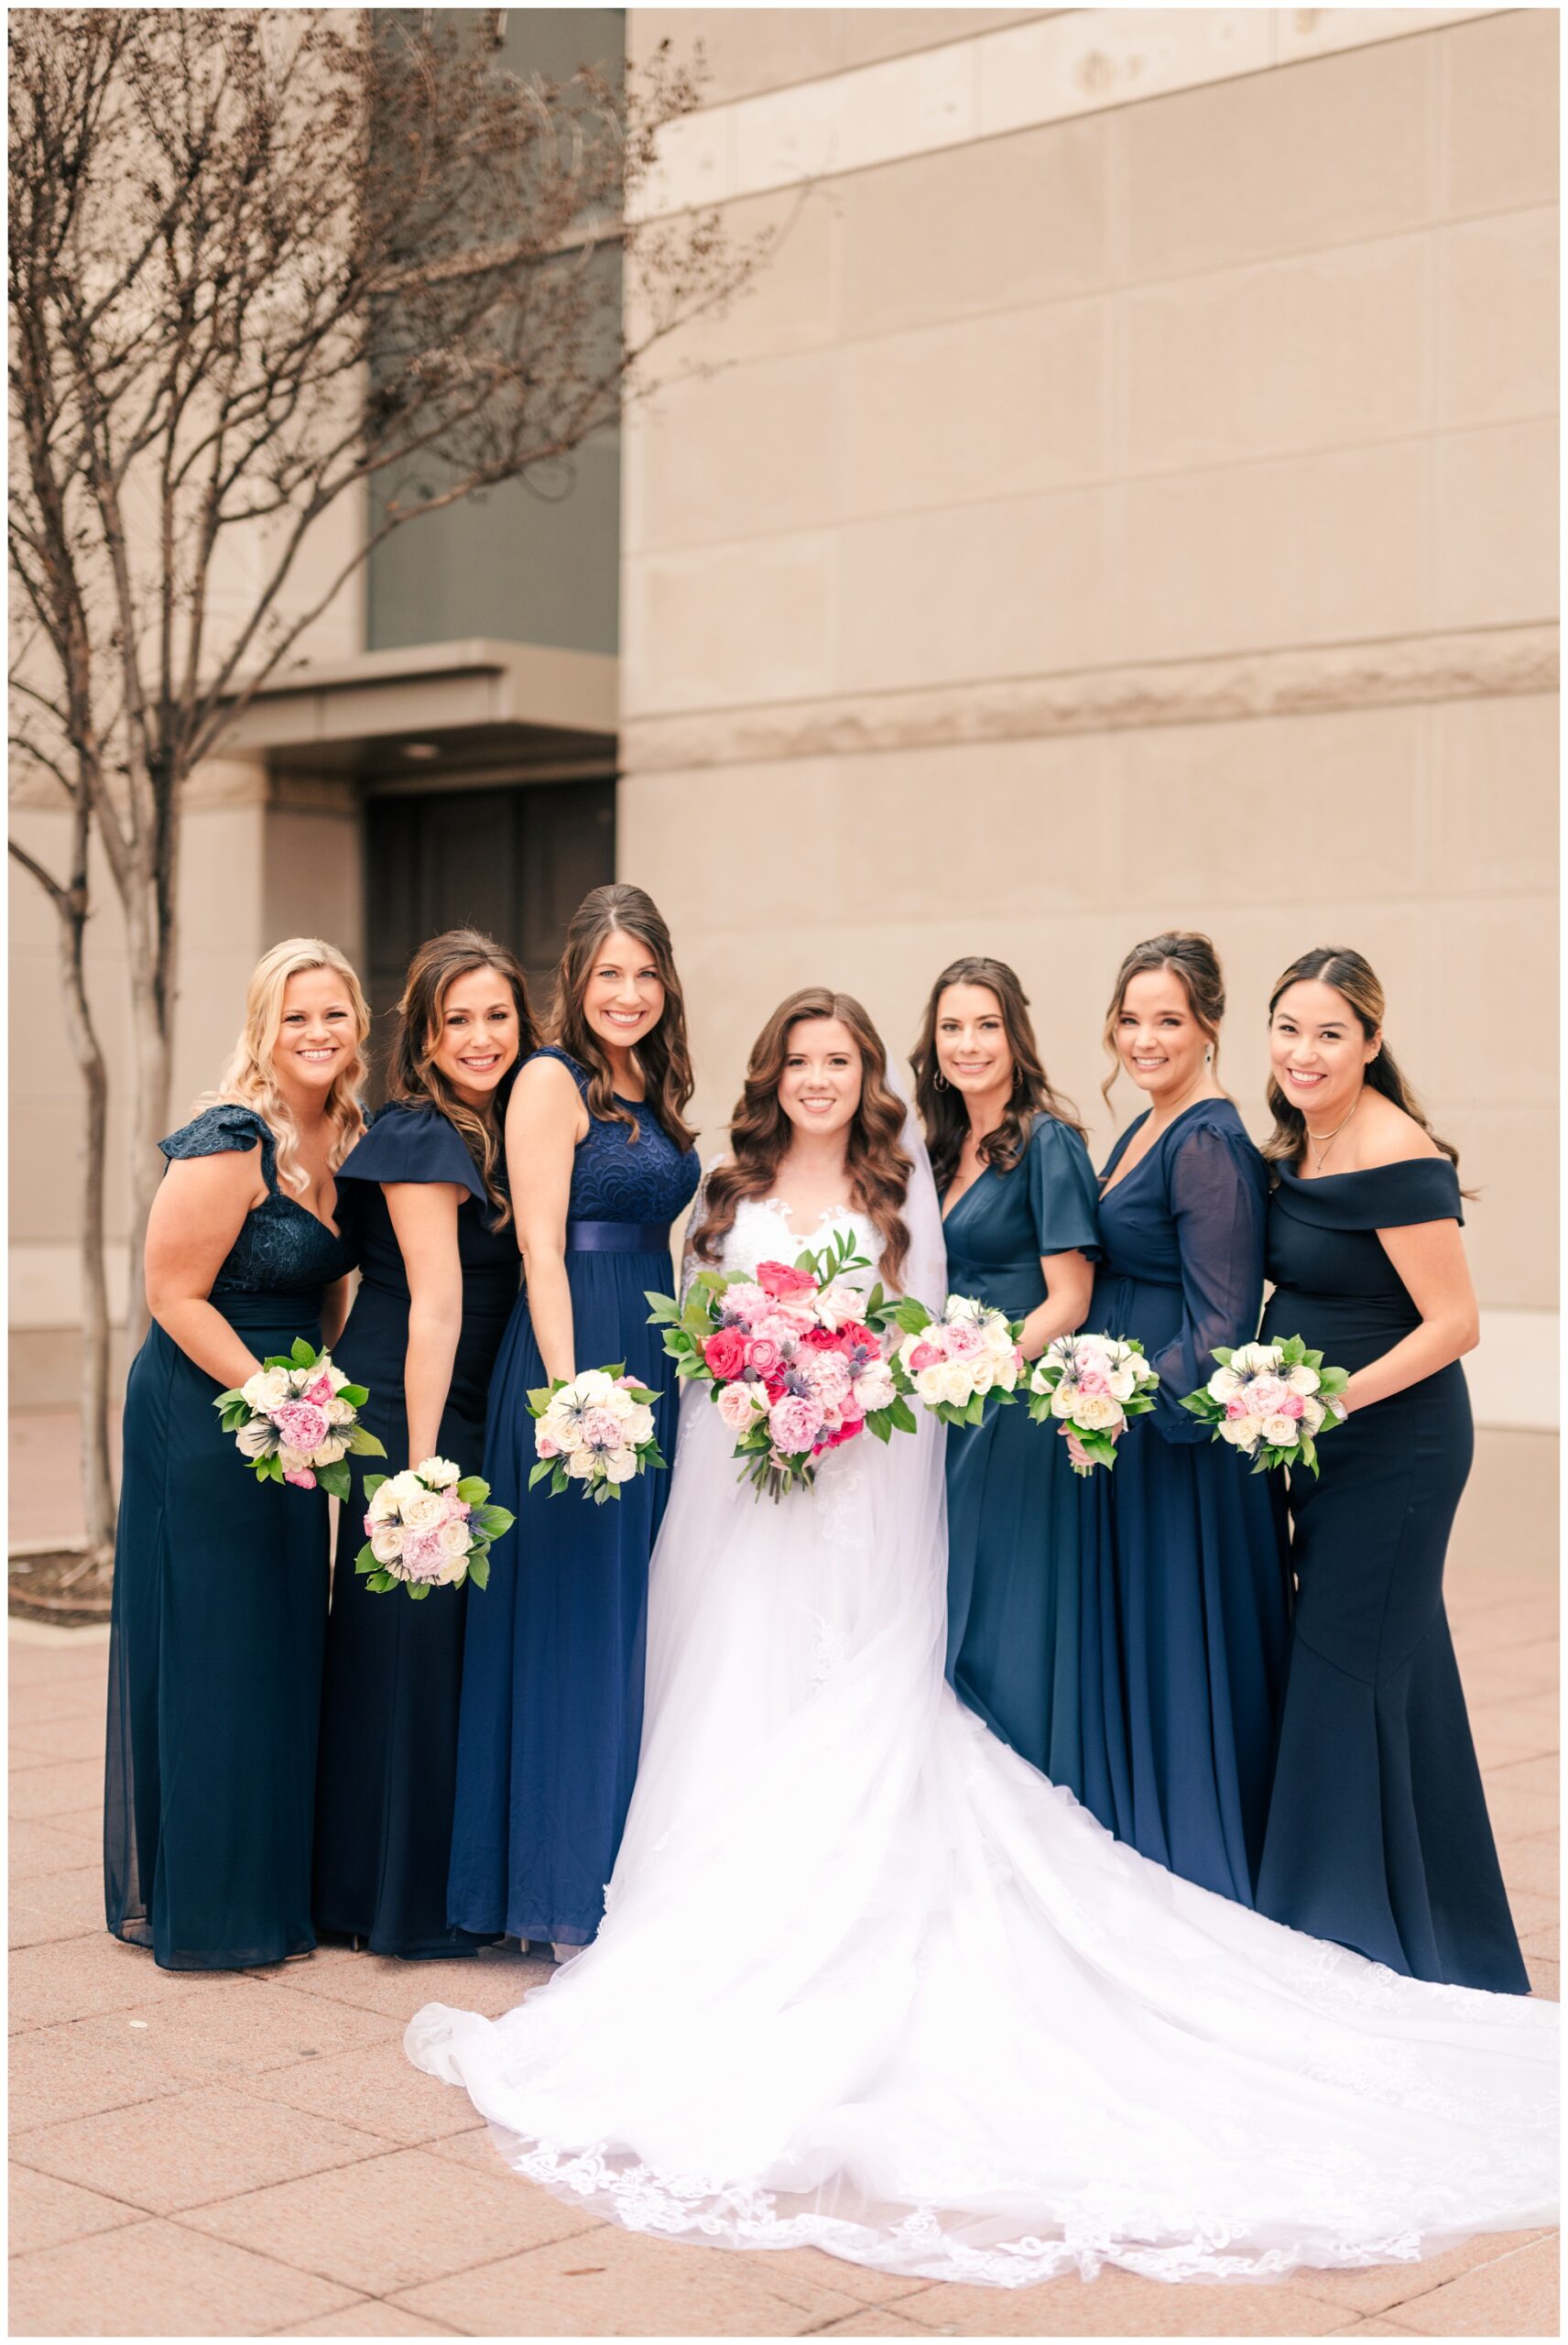 Bridemaids pose for a photo outside the Co Cathedral of the Sacred Heart in Houston.